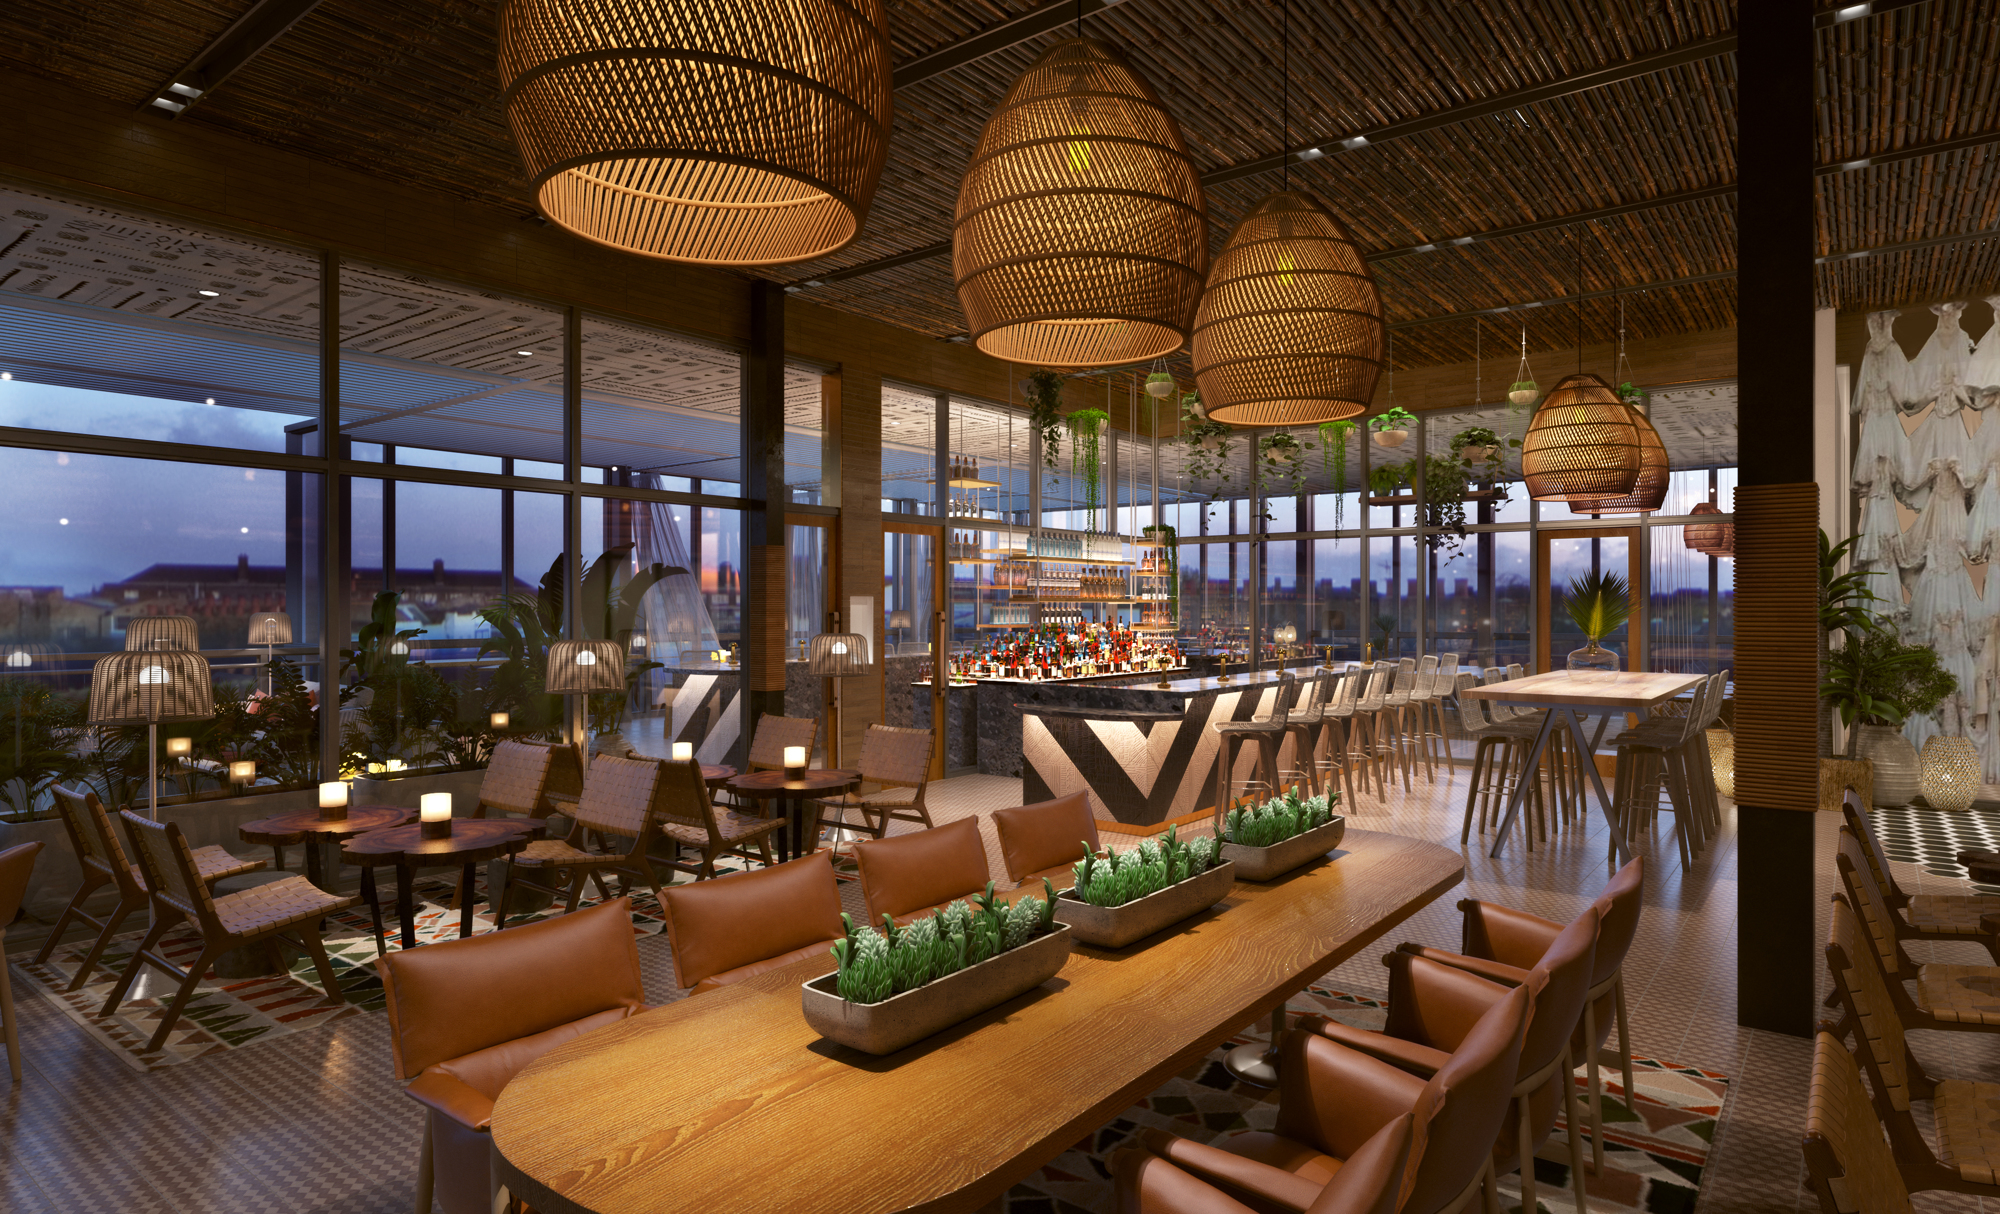 Courtesy. Sal Y Mar, the new rooftop bar on top of the forthcoming Aloft and Element Hotel in Midtown Tampa, is prepping for a January 2021 opening.